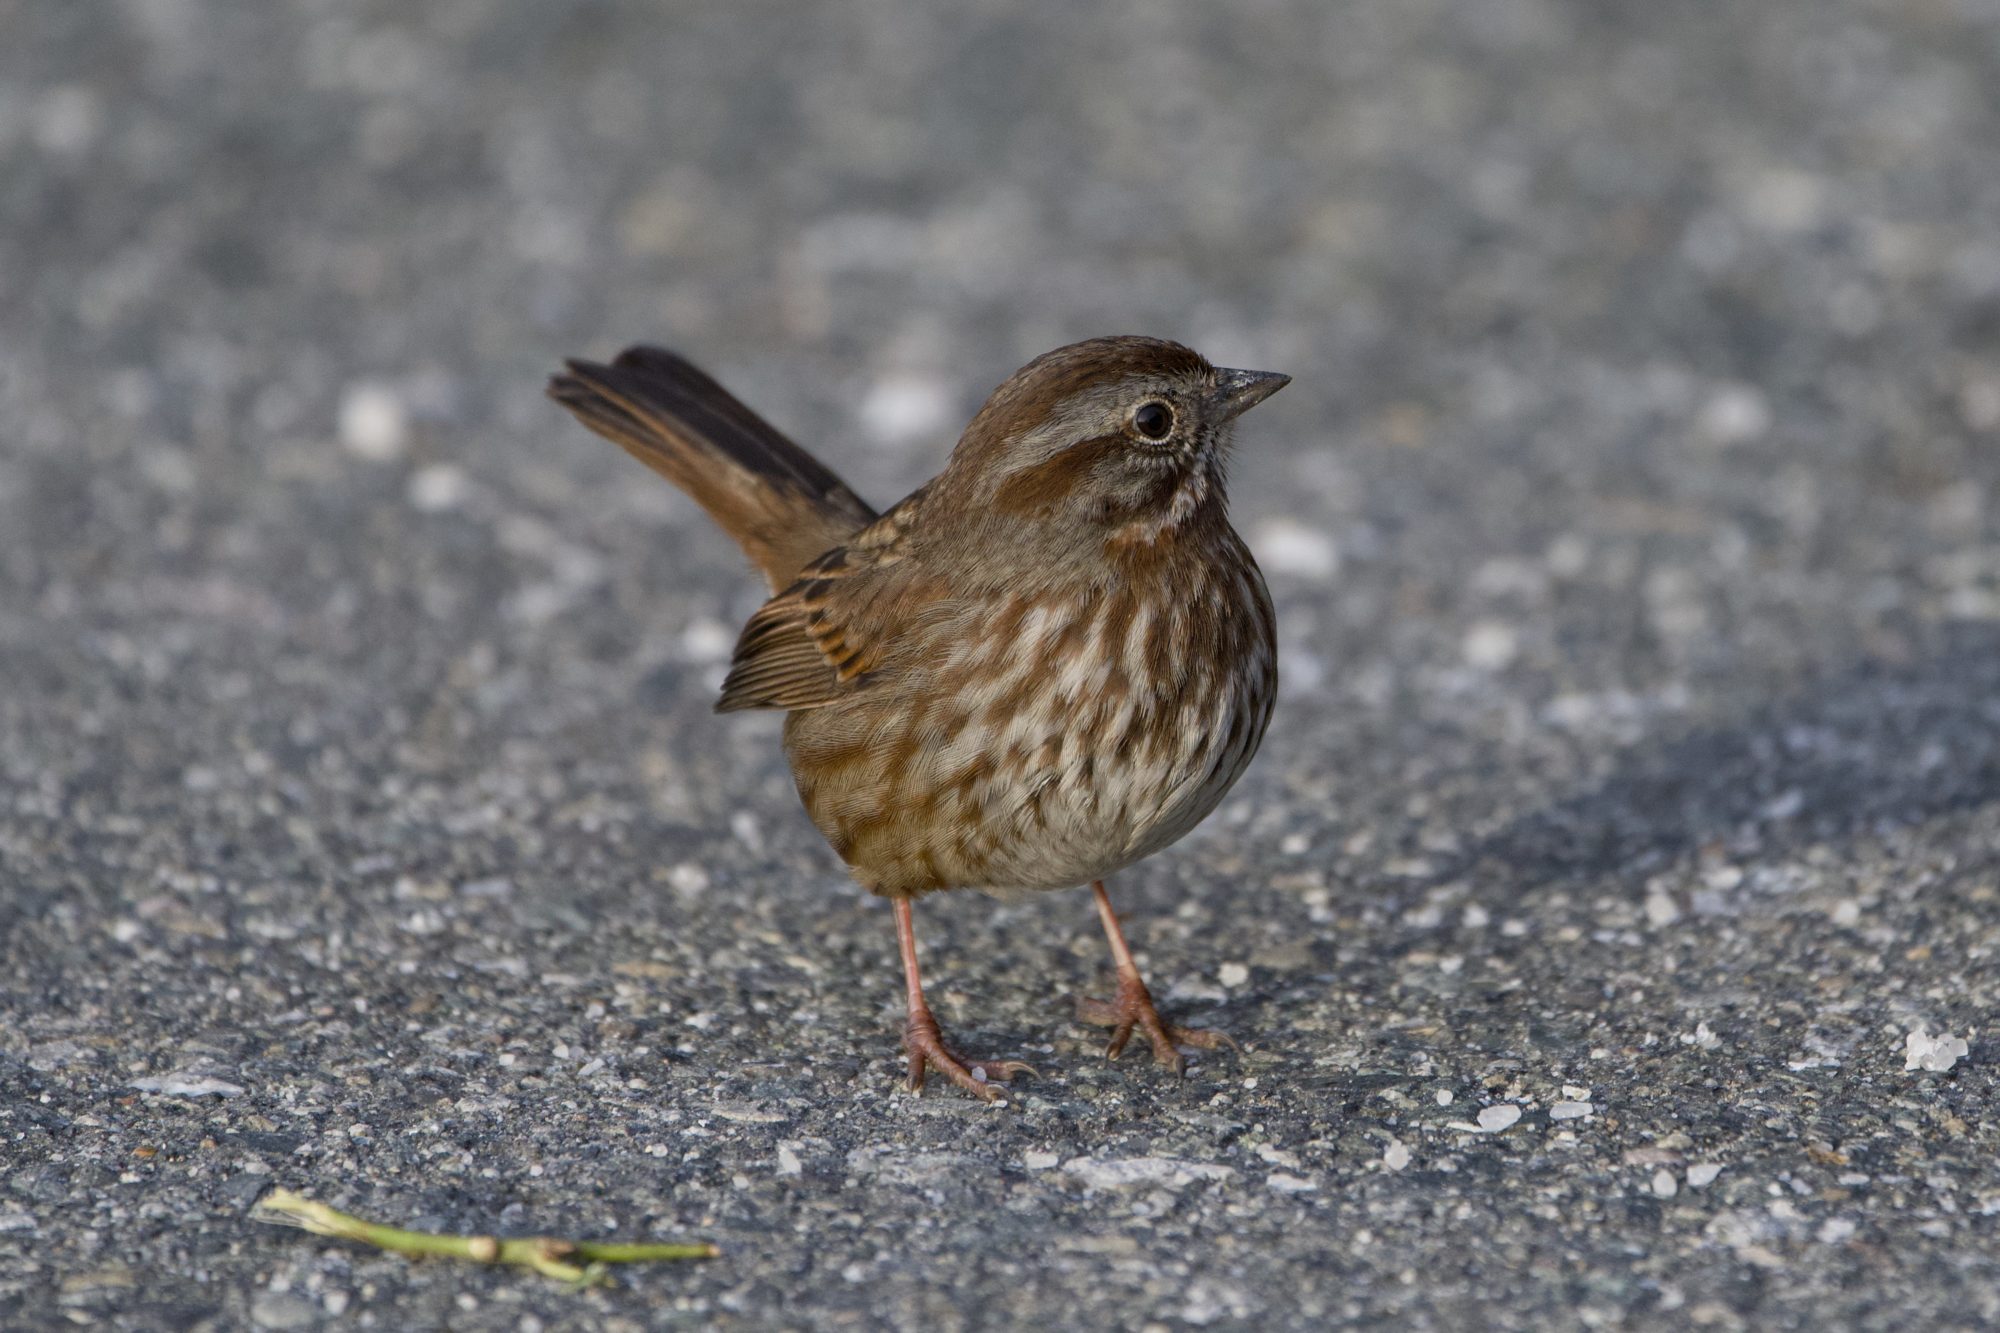 A Song Sparrow on the paved seawall, looking around